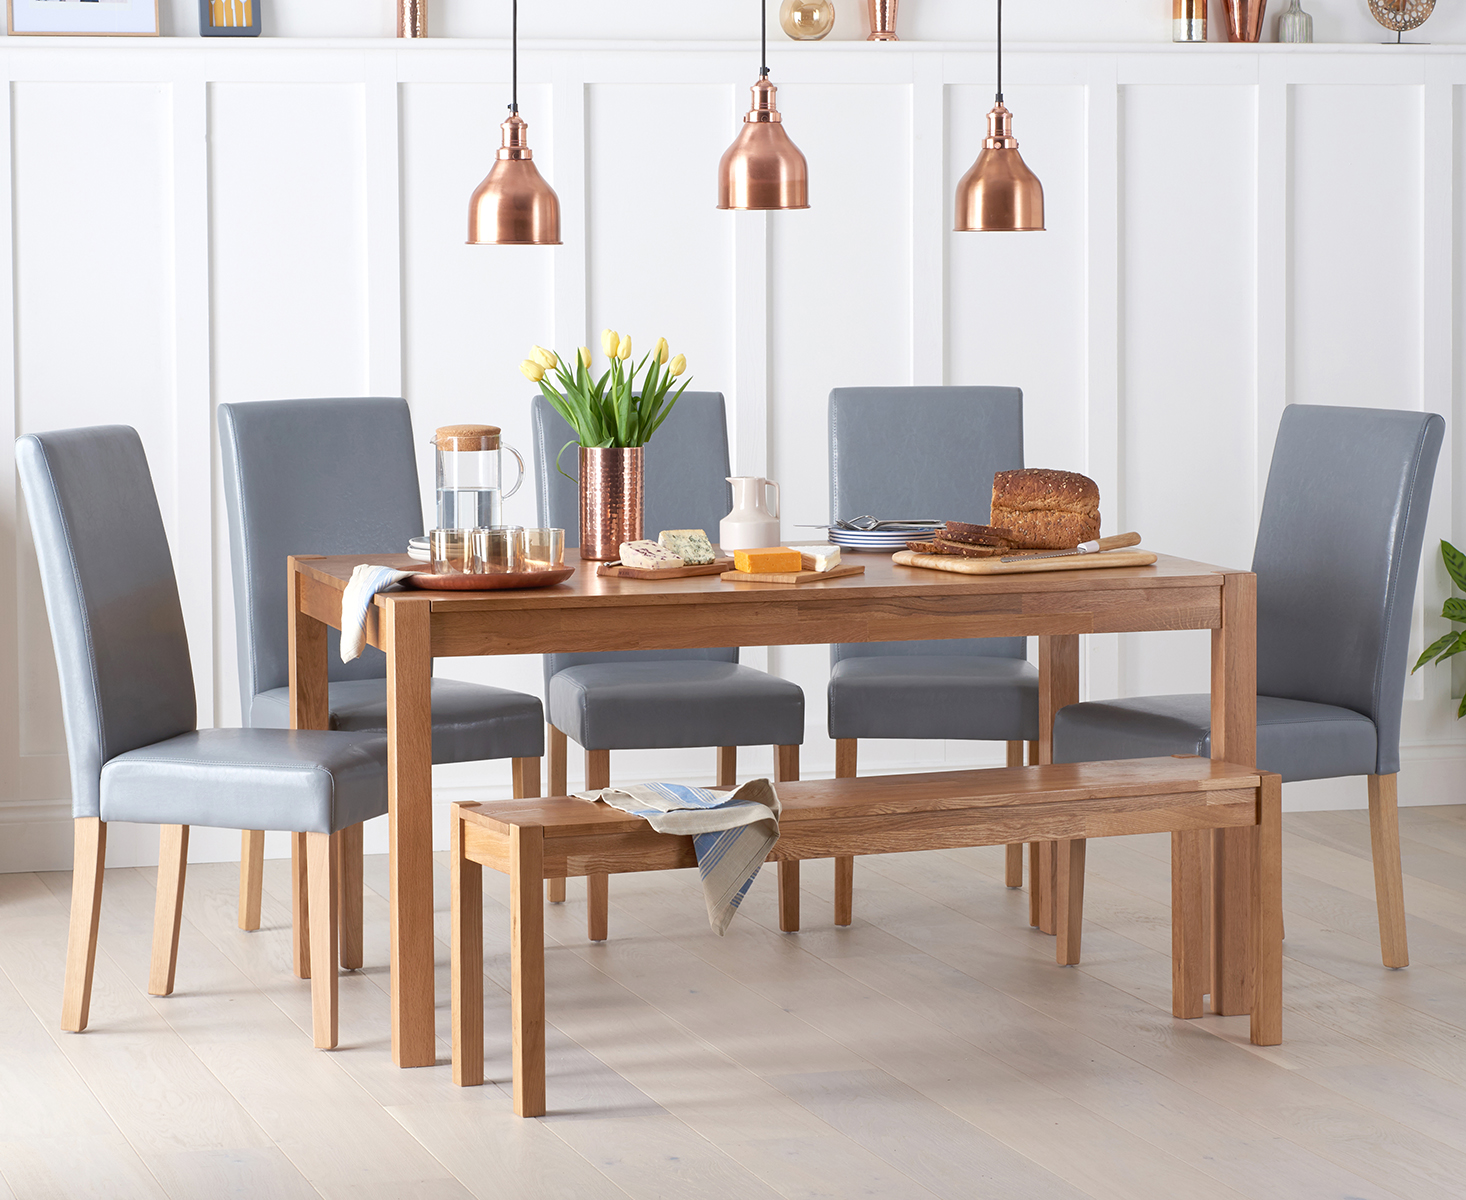 York 150cm Solid Oak Dining Table With 4 Grey Olivia Chairs And 2 York Bencheses